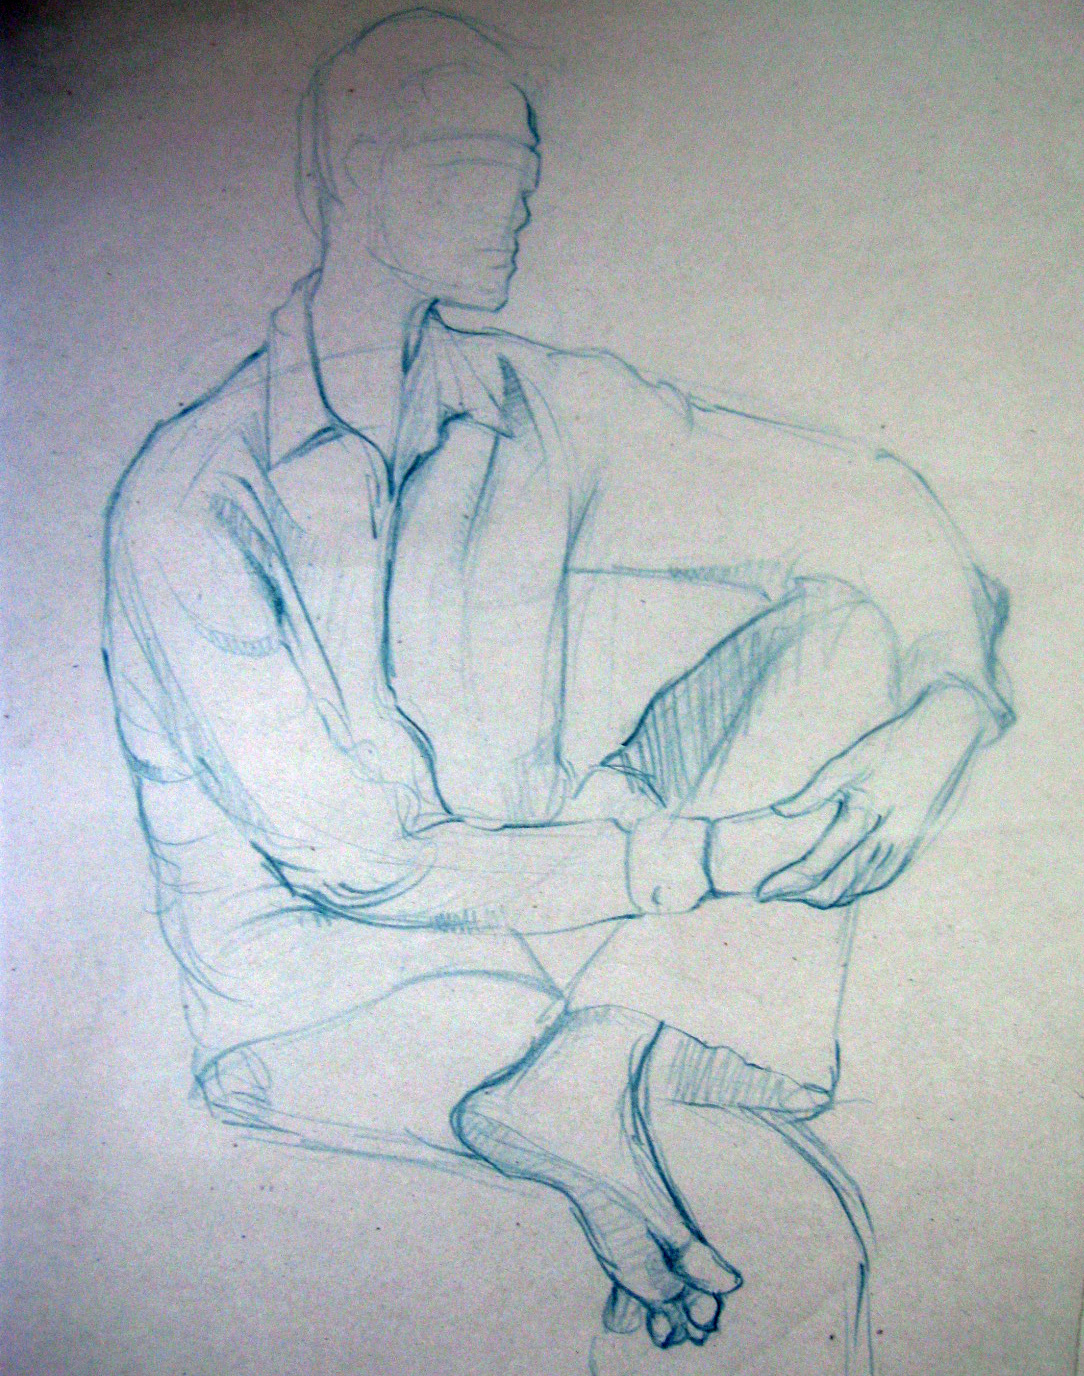 sketching life drawing rapid sketches anatomy illustrations